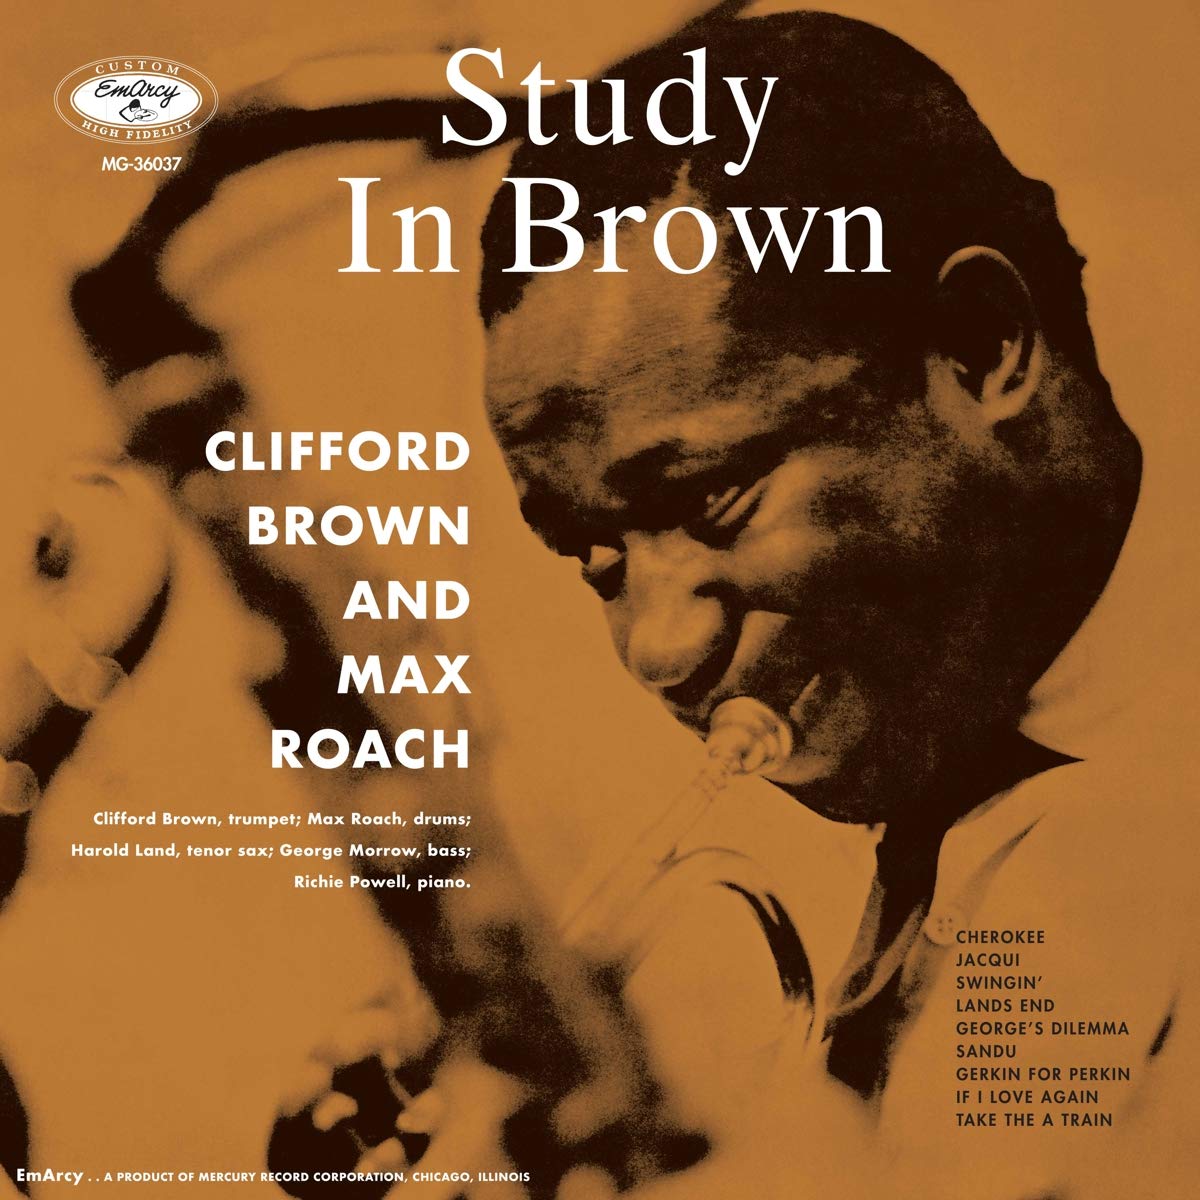 Study in Brown (Verve Acoustic Sounds Series)